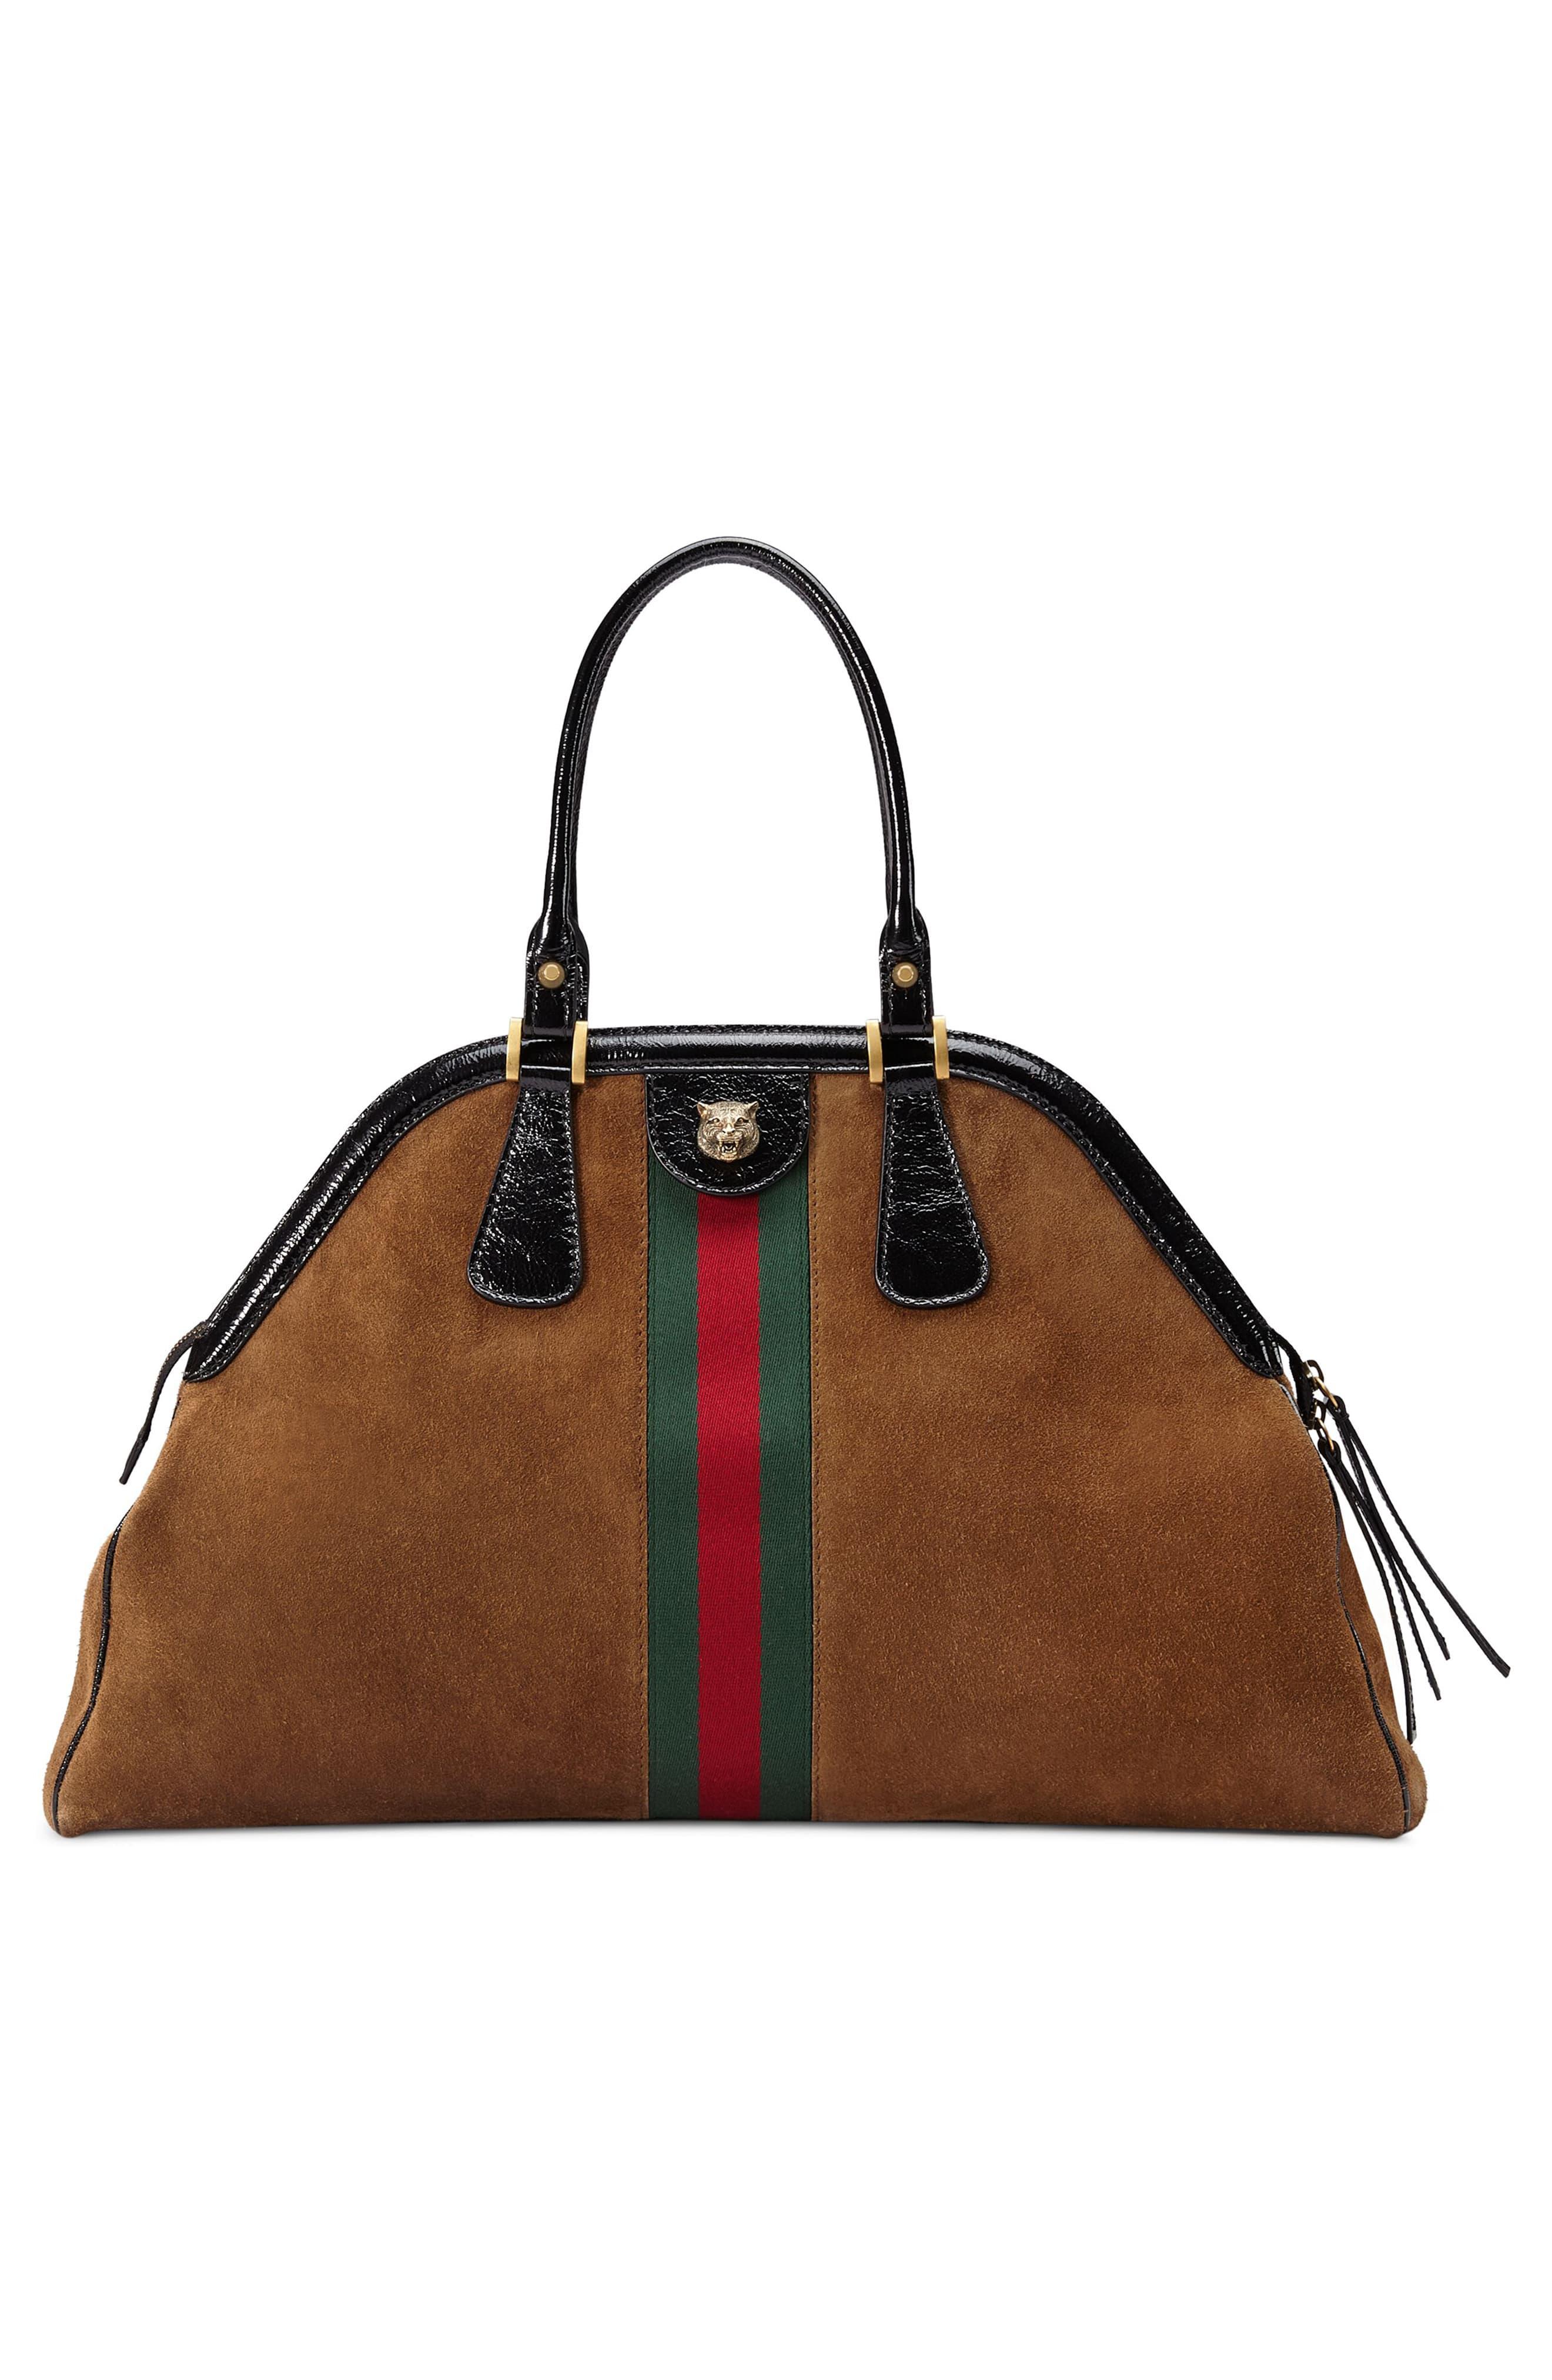 Gucci Large Re(belle) Suede Satchel in Brown | Lyst